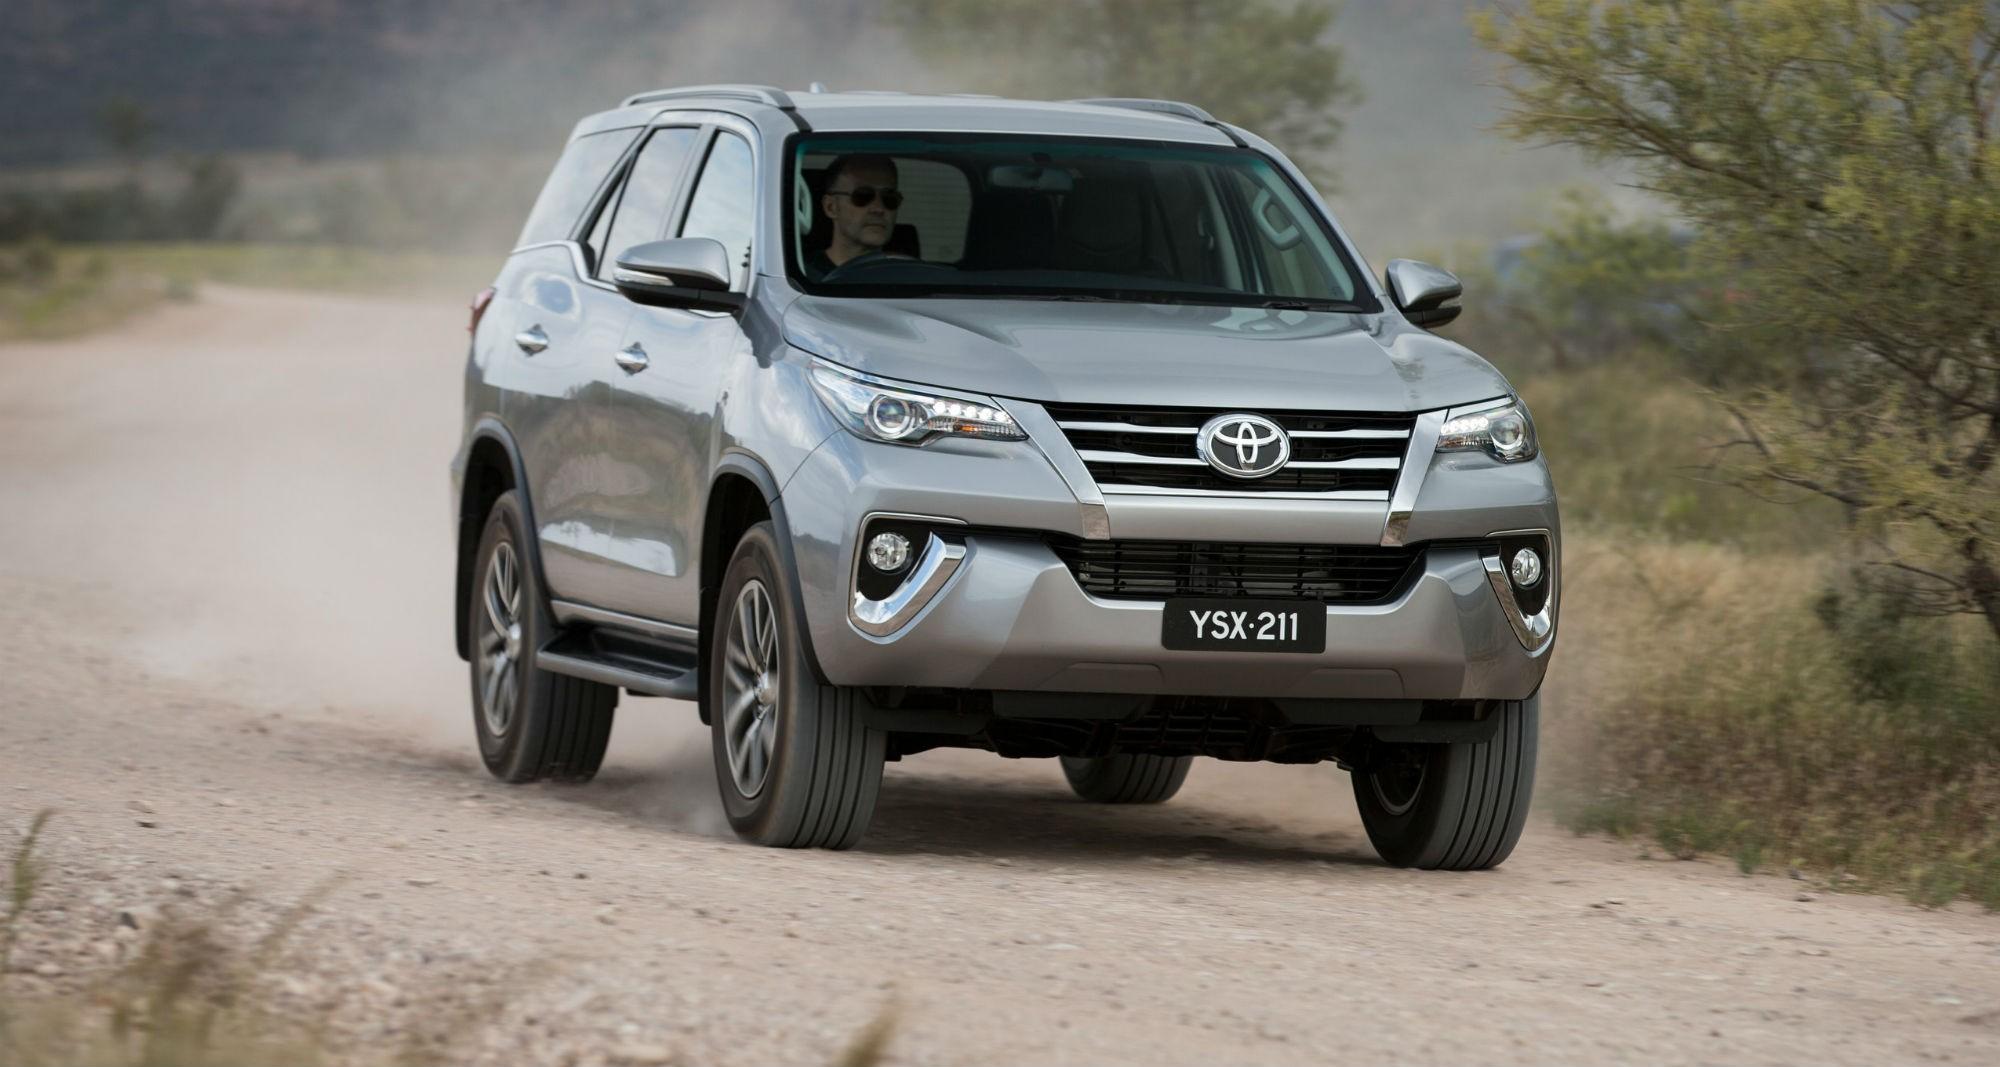 Toyota Fortuner wallpaper, Vehicles, HQ Toyota Fortuner picture